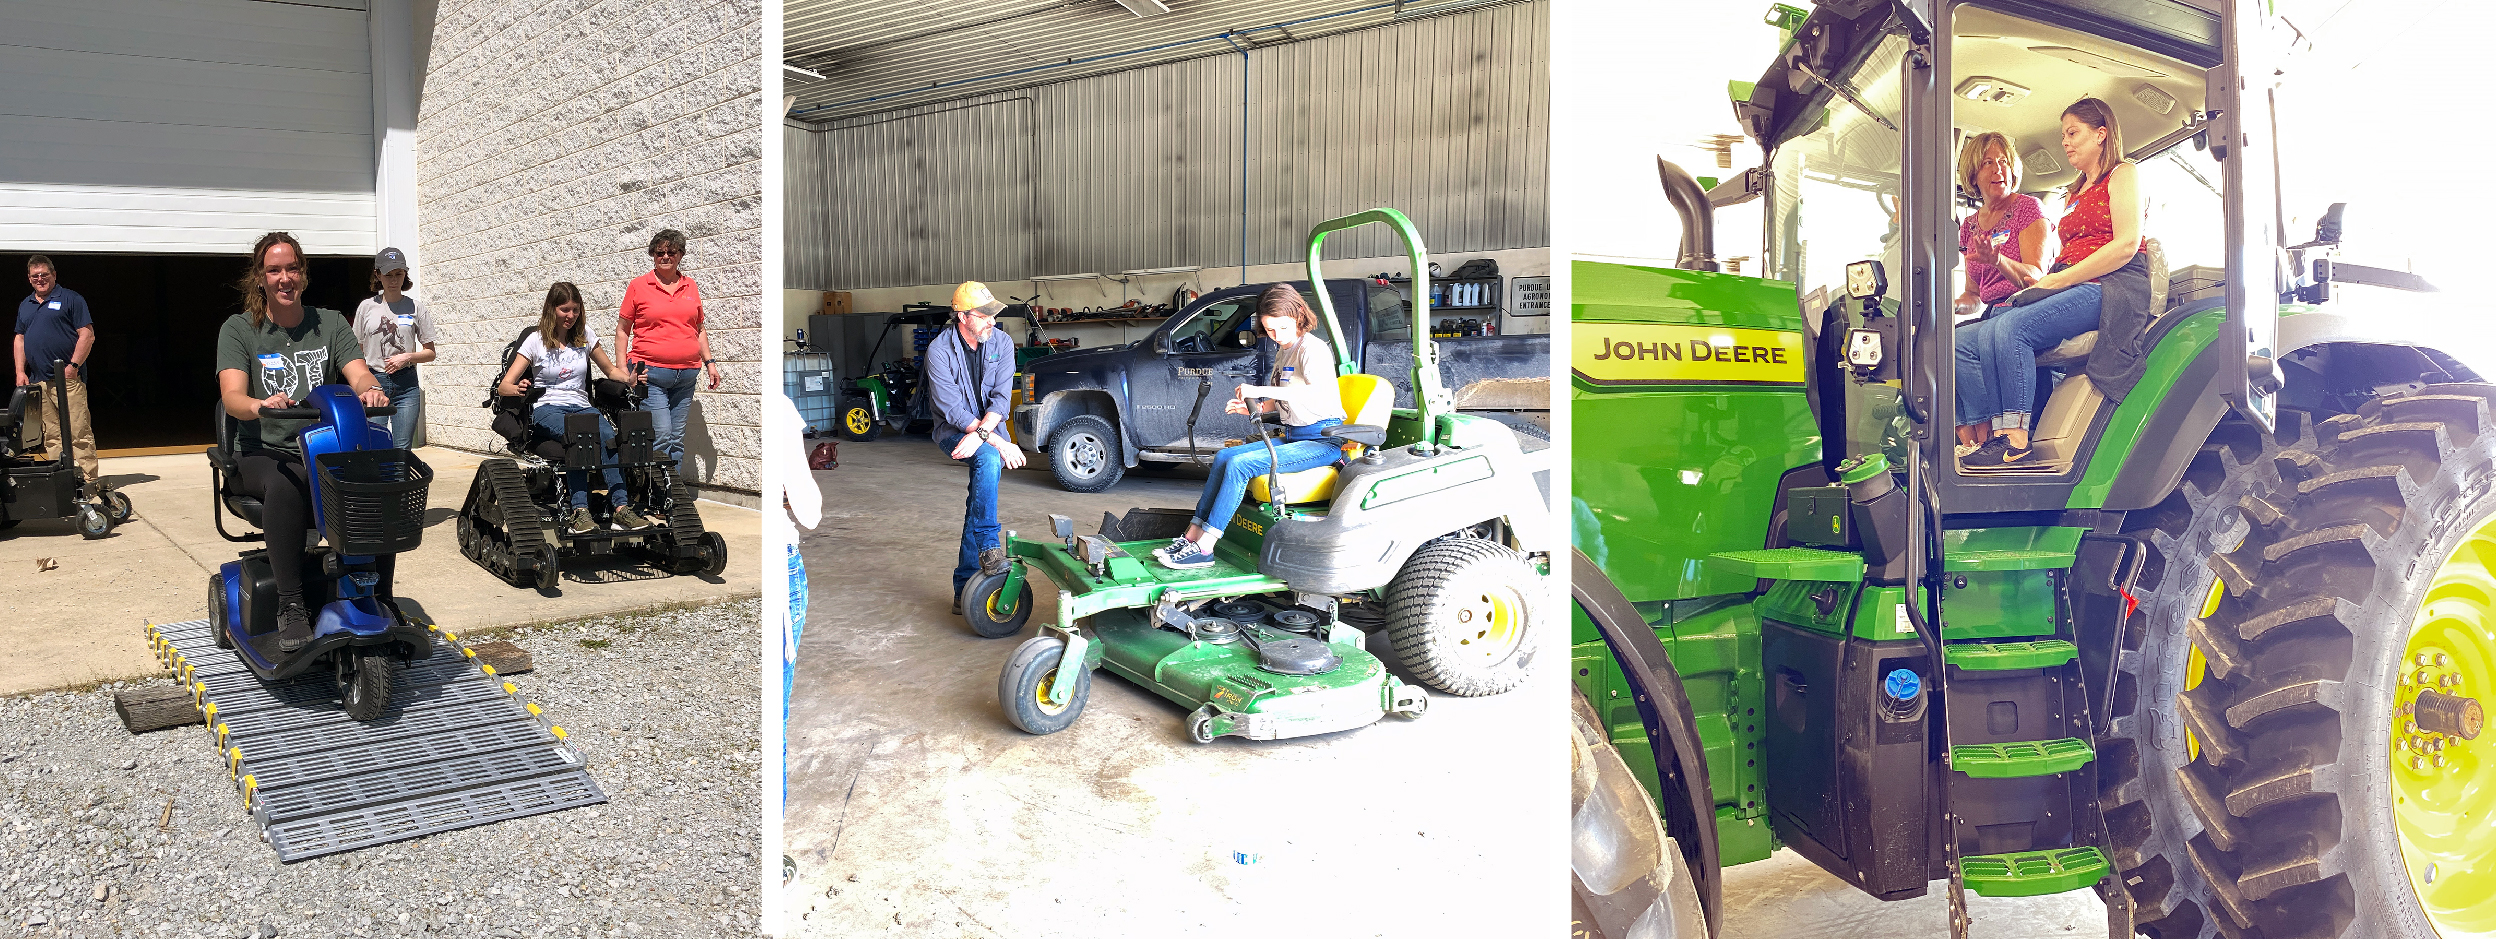 AgrAbility photos - composite of attendees trying farm equipment